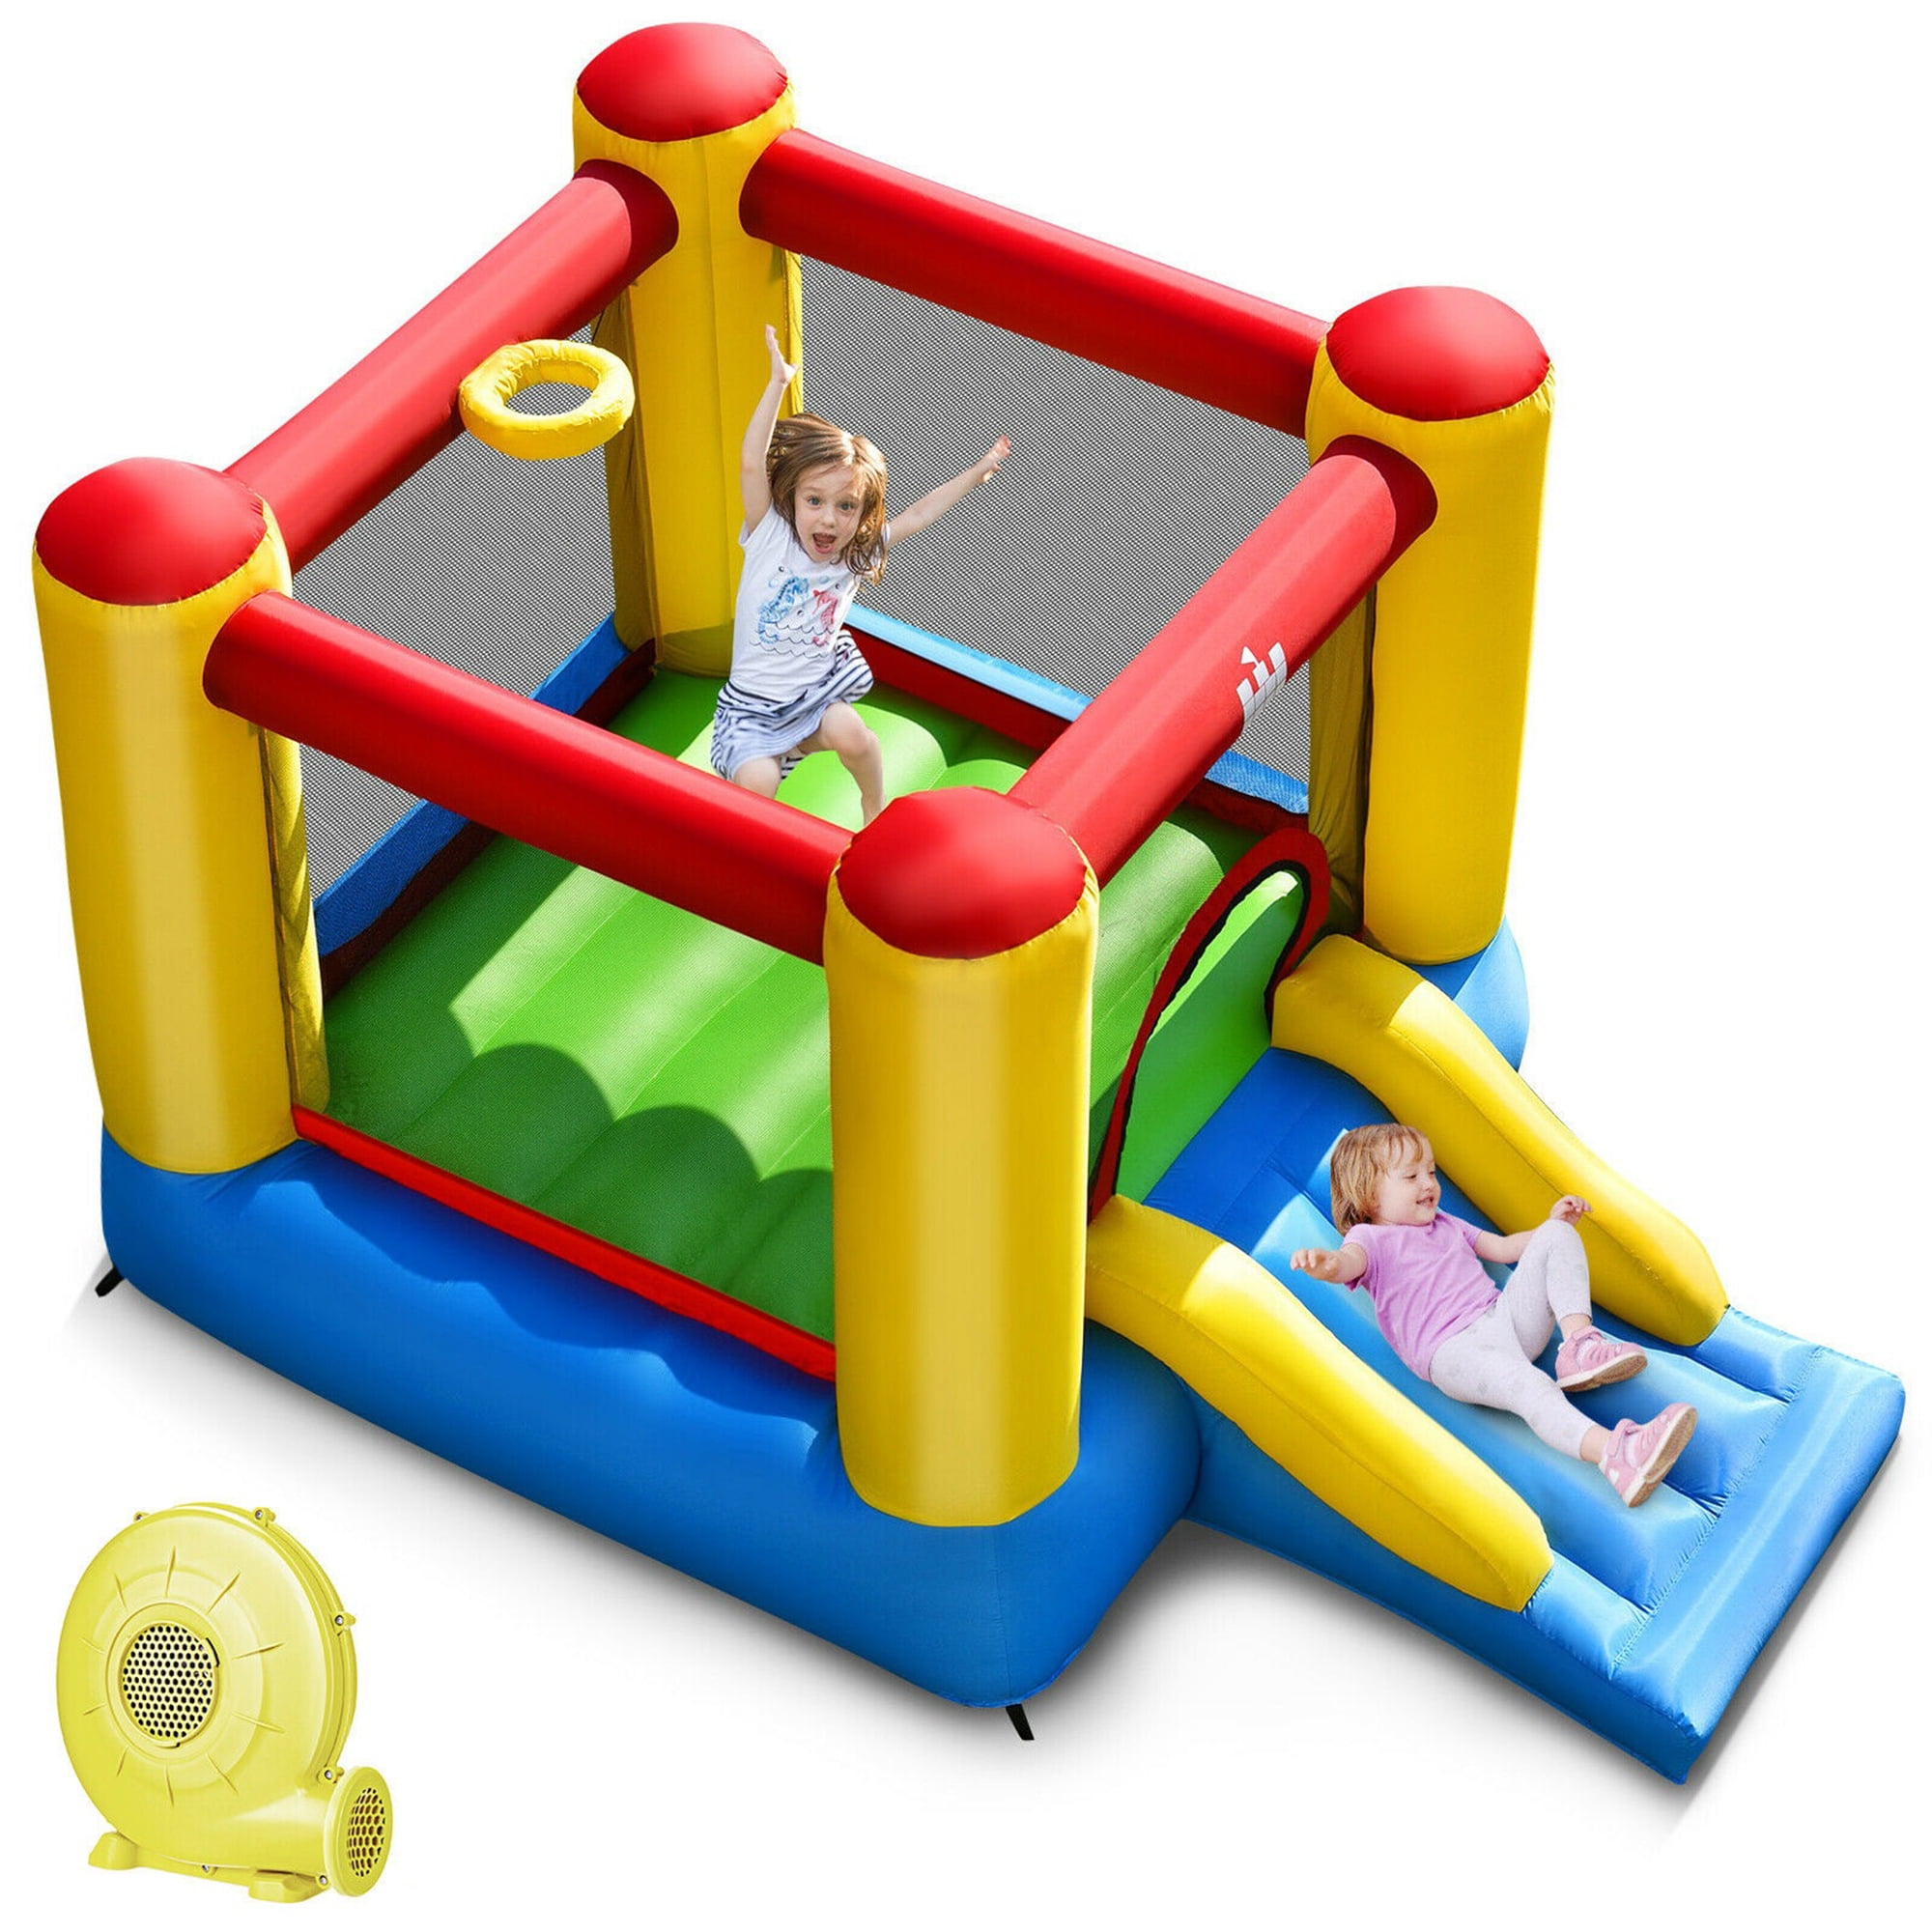 Tj's House Of Bounce Bounce House Rentals